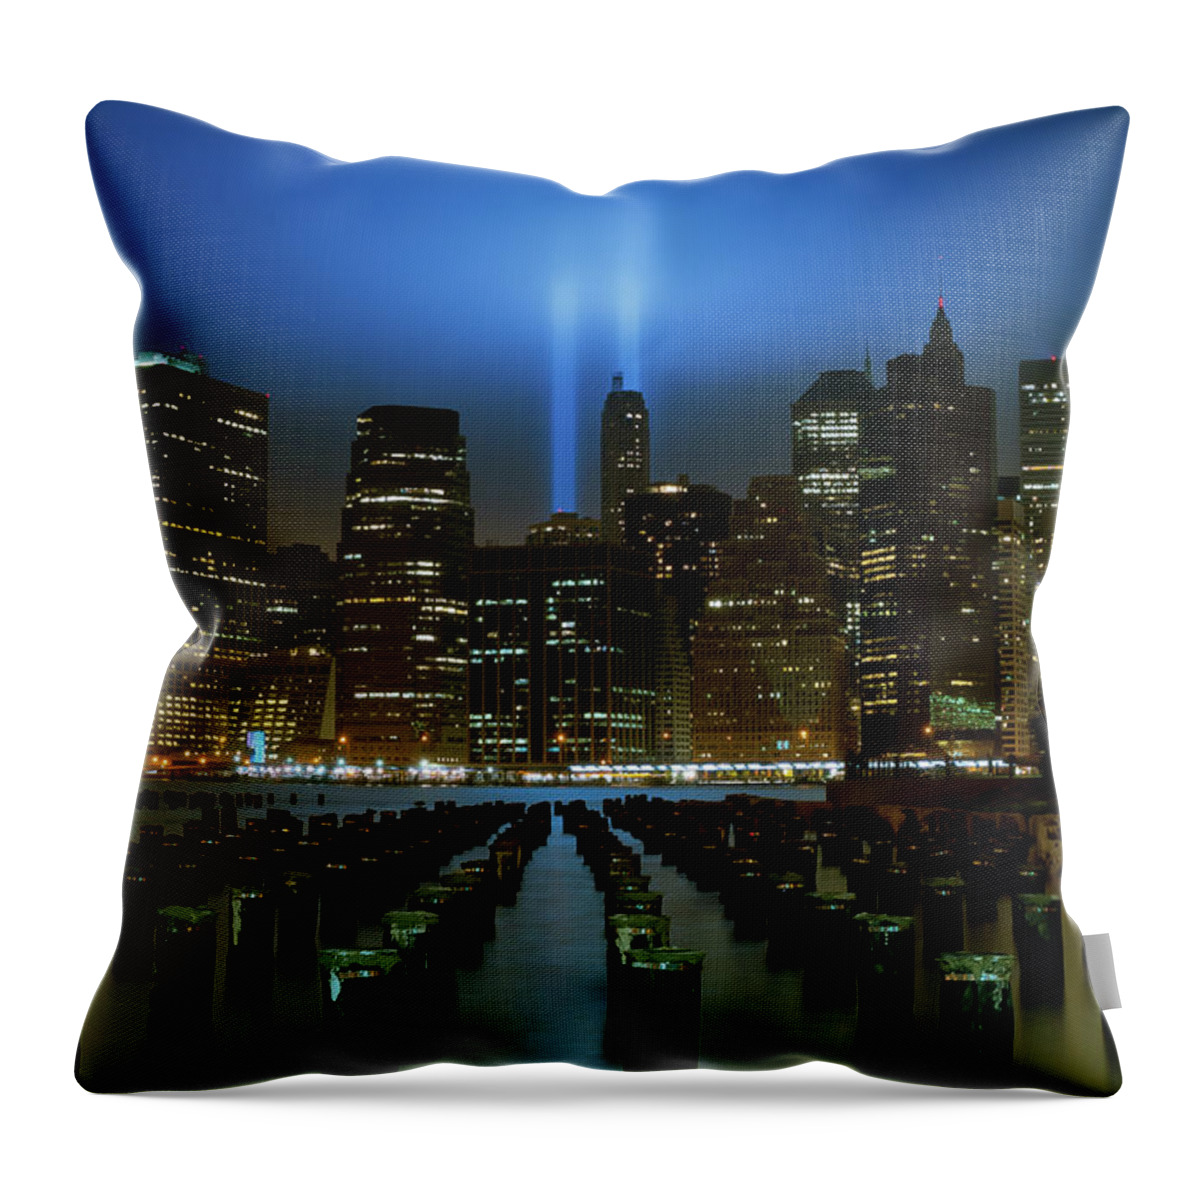 Bollard Throw Pillow featuring the photograph 9-11-11 Tribute In Lights by Tom Reese, Www.wowography.com